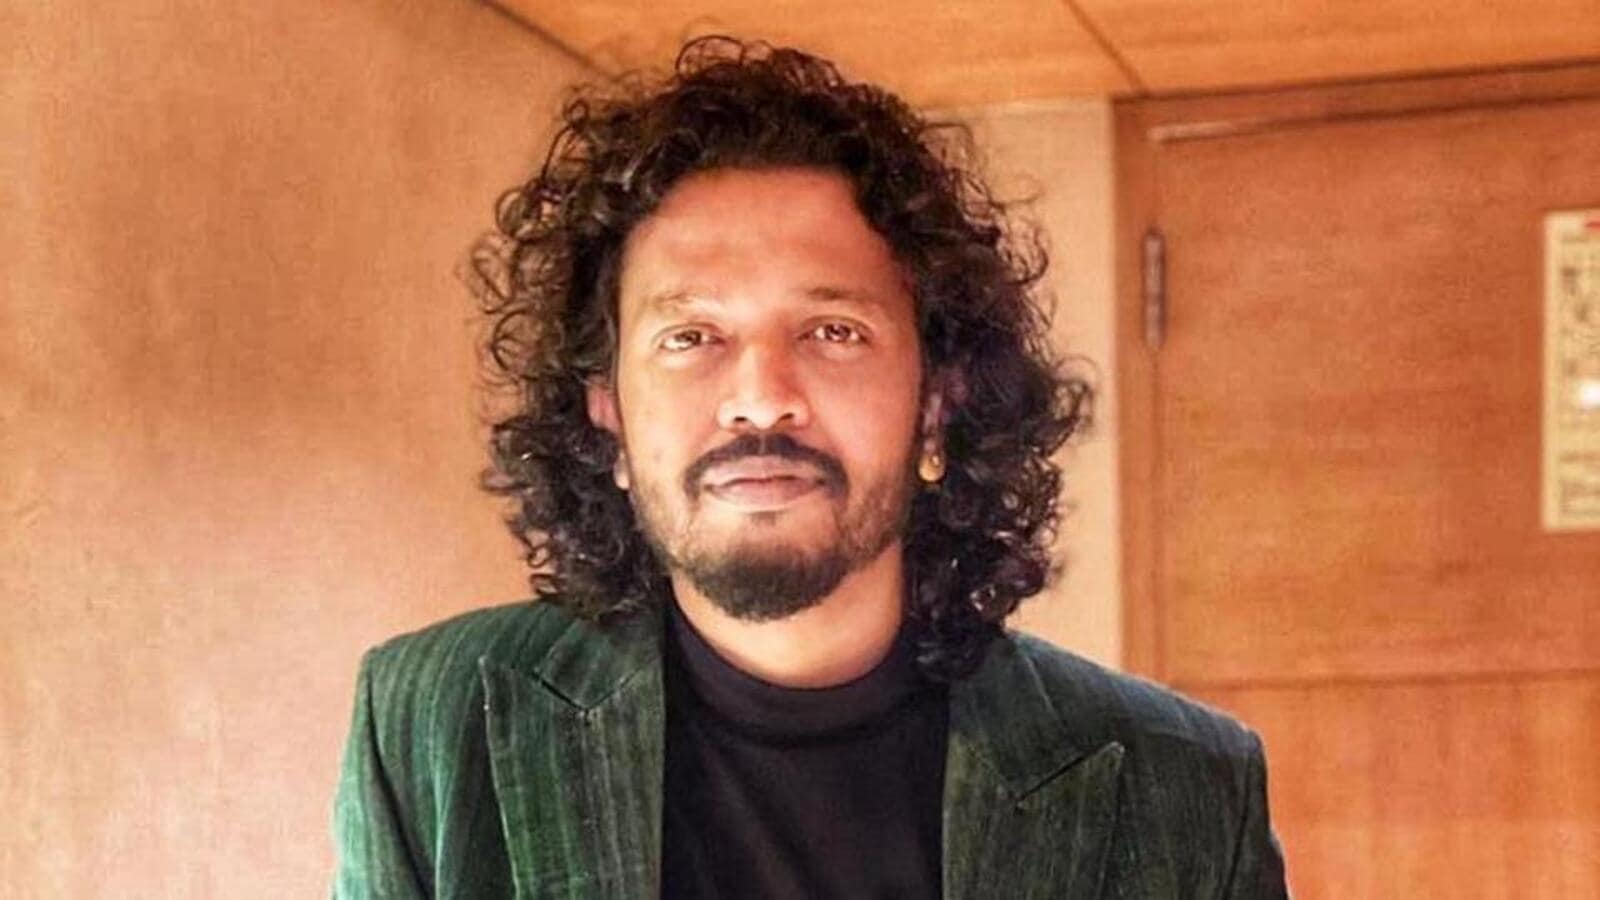 Current Laga Re singer Nakash Aziz doesn’t mind south influence on Bollywood music